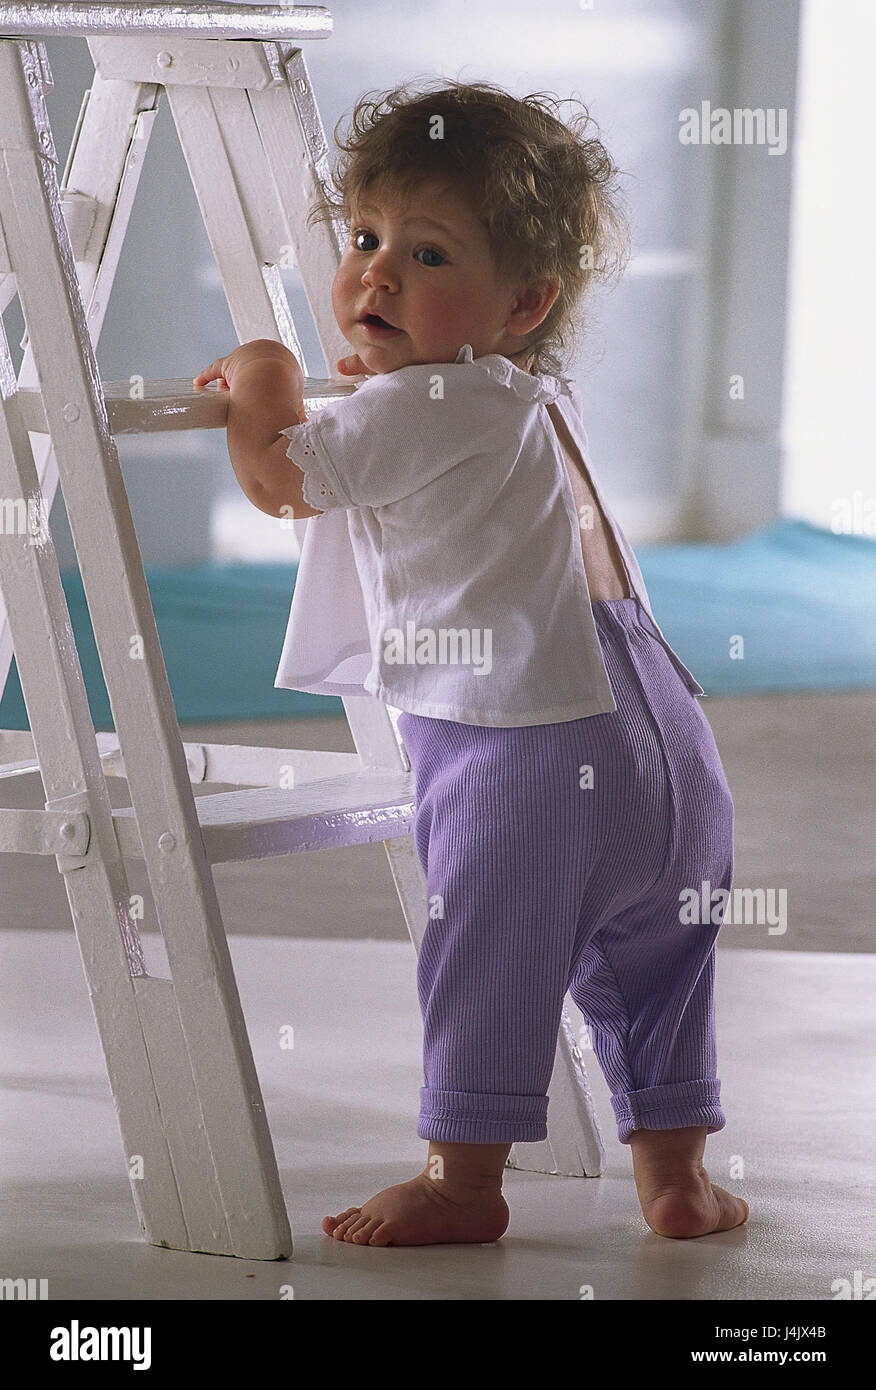 Baby, conductor, learn stick, walking attempt, back view inside, at home, child, infant, barefoot, to go, stand, try, try out, stepladder, learning process, development, development phase, carefully, curiously, look around Stock Photo